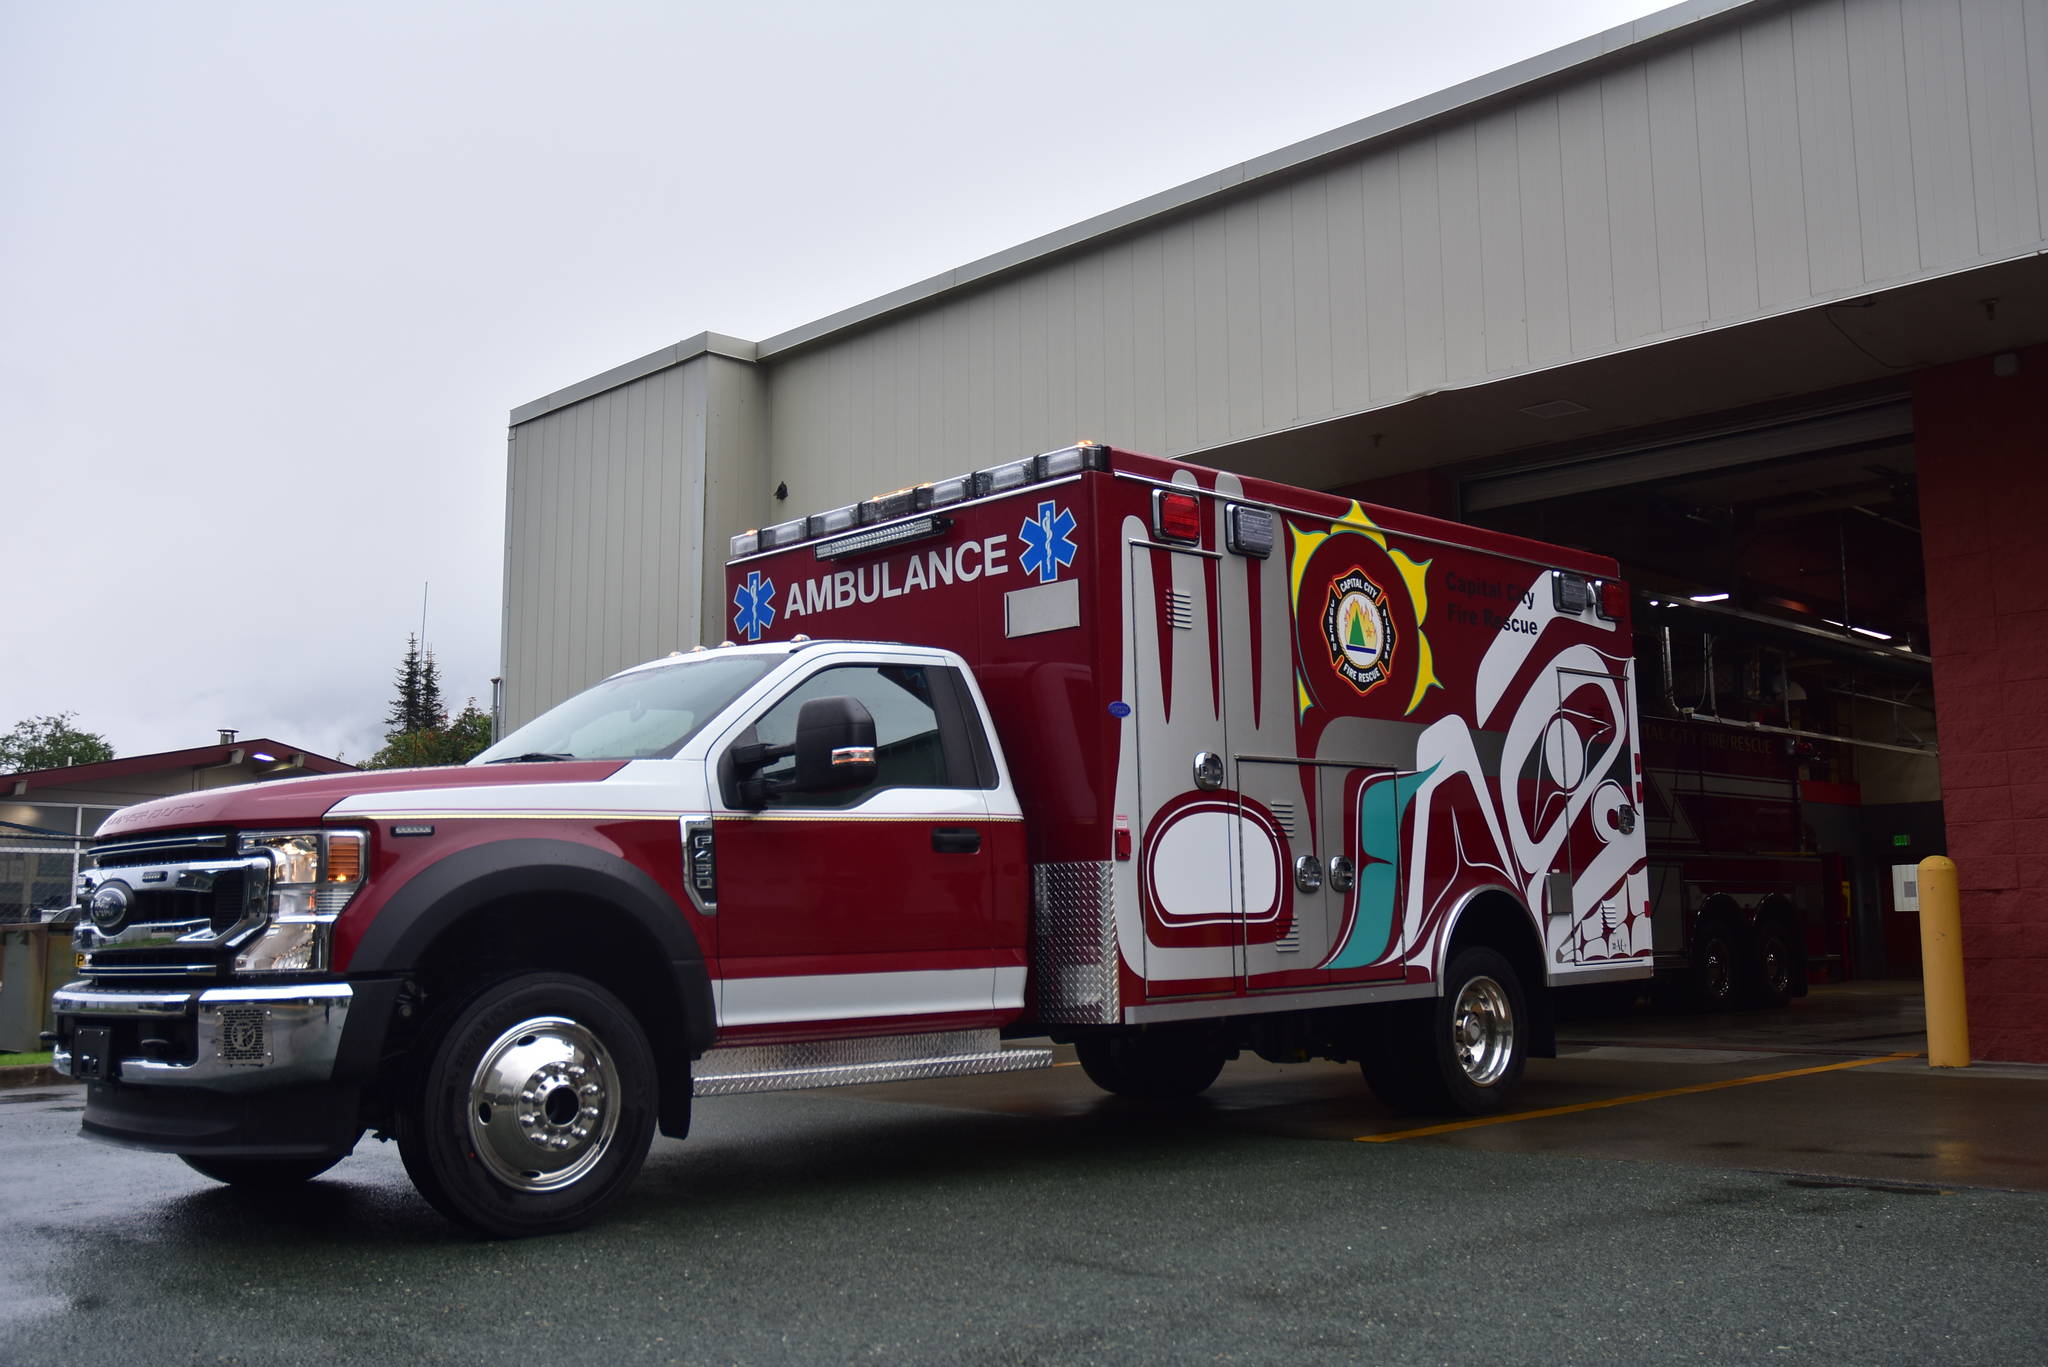 Formline follows function: New ambulance art reaches to cultural roots, fits vehicle’s purpose